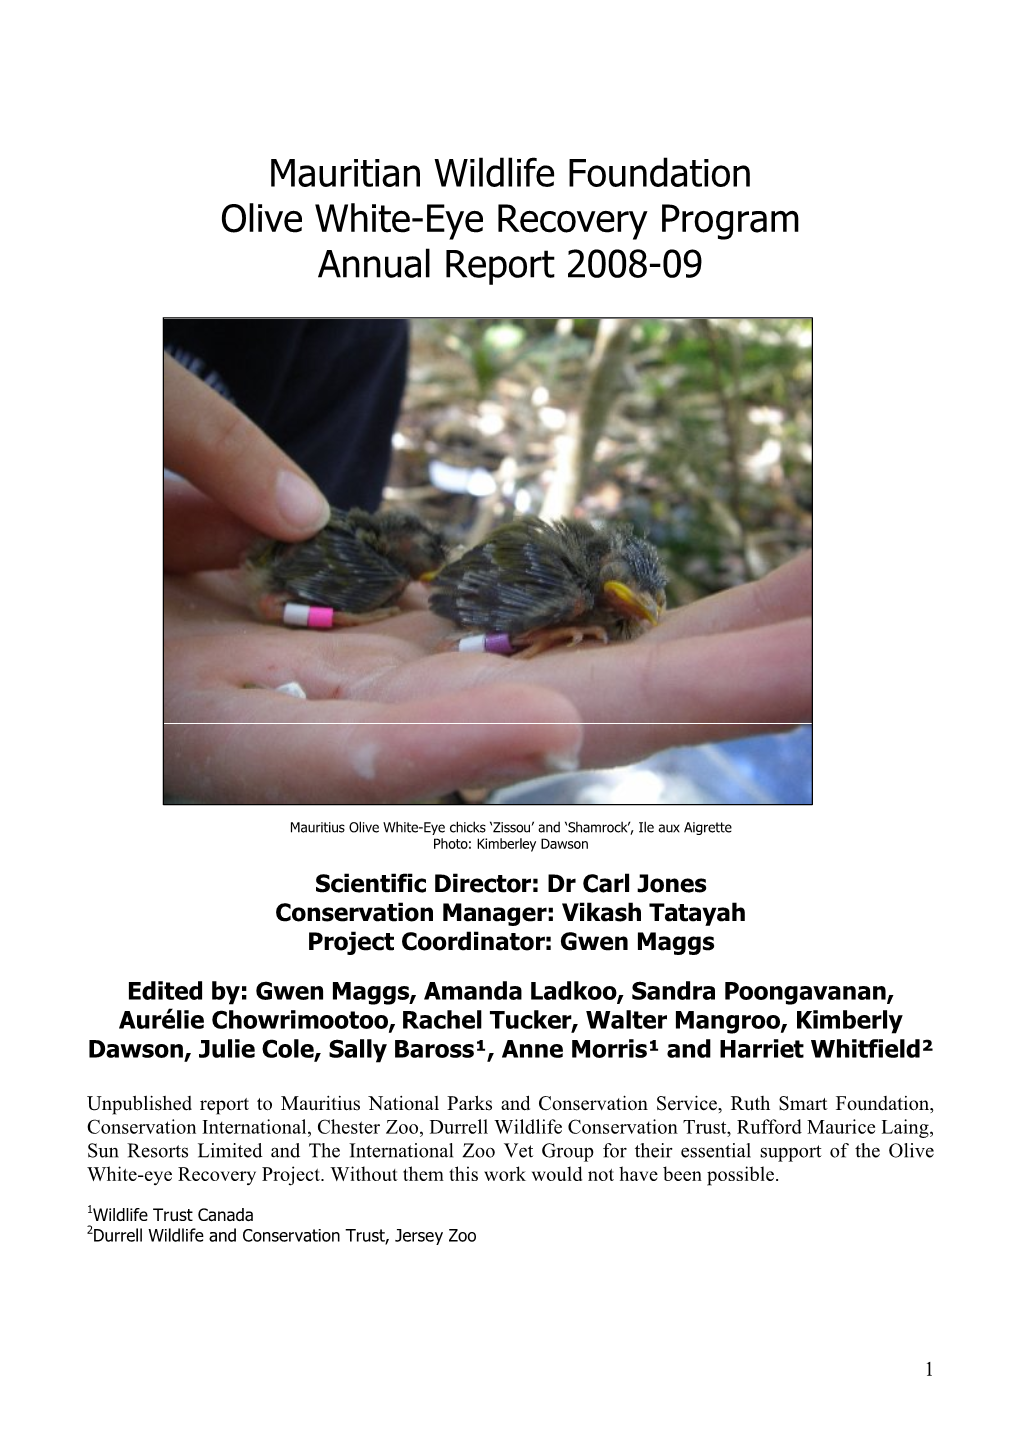 Mauritian Wildlife Foundation Olive White-Eye Recovery Program Annual Report 2008-09